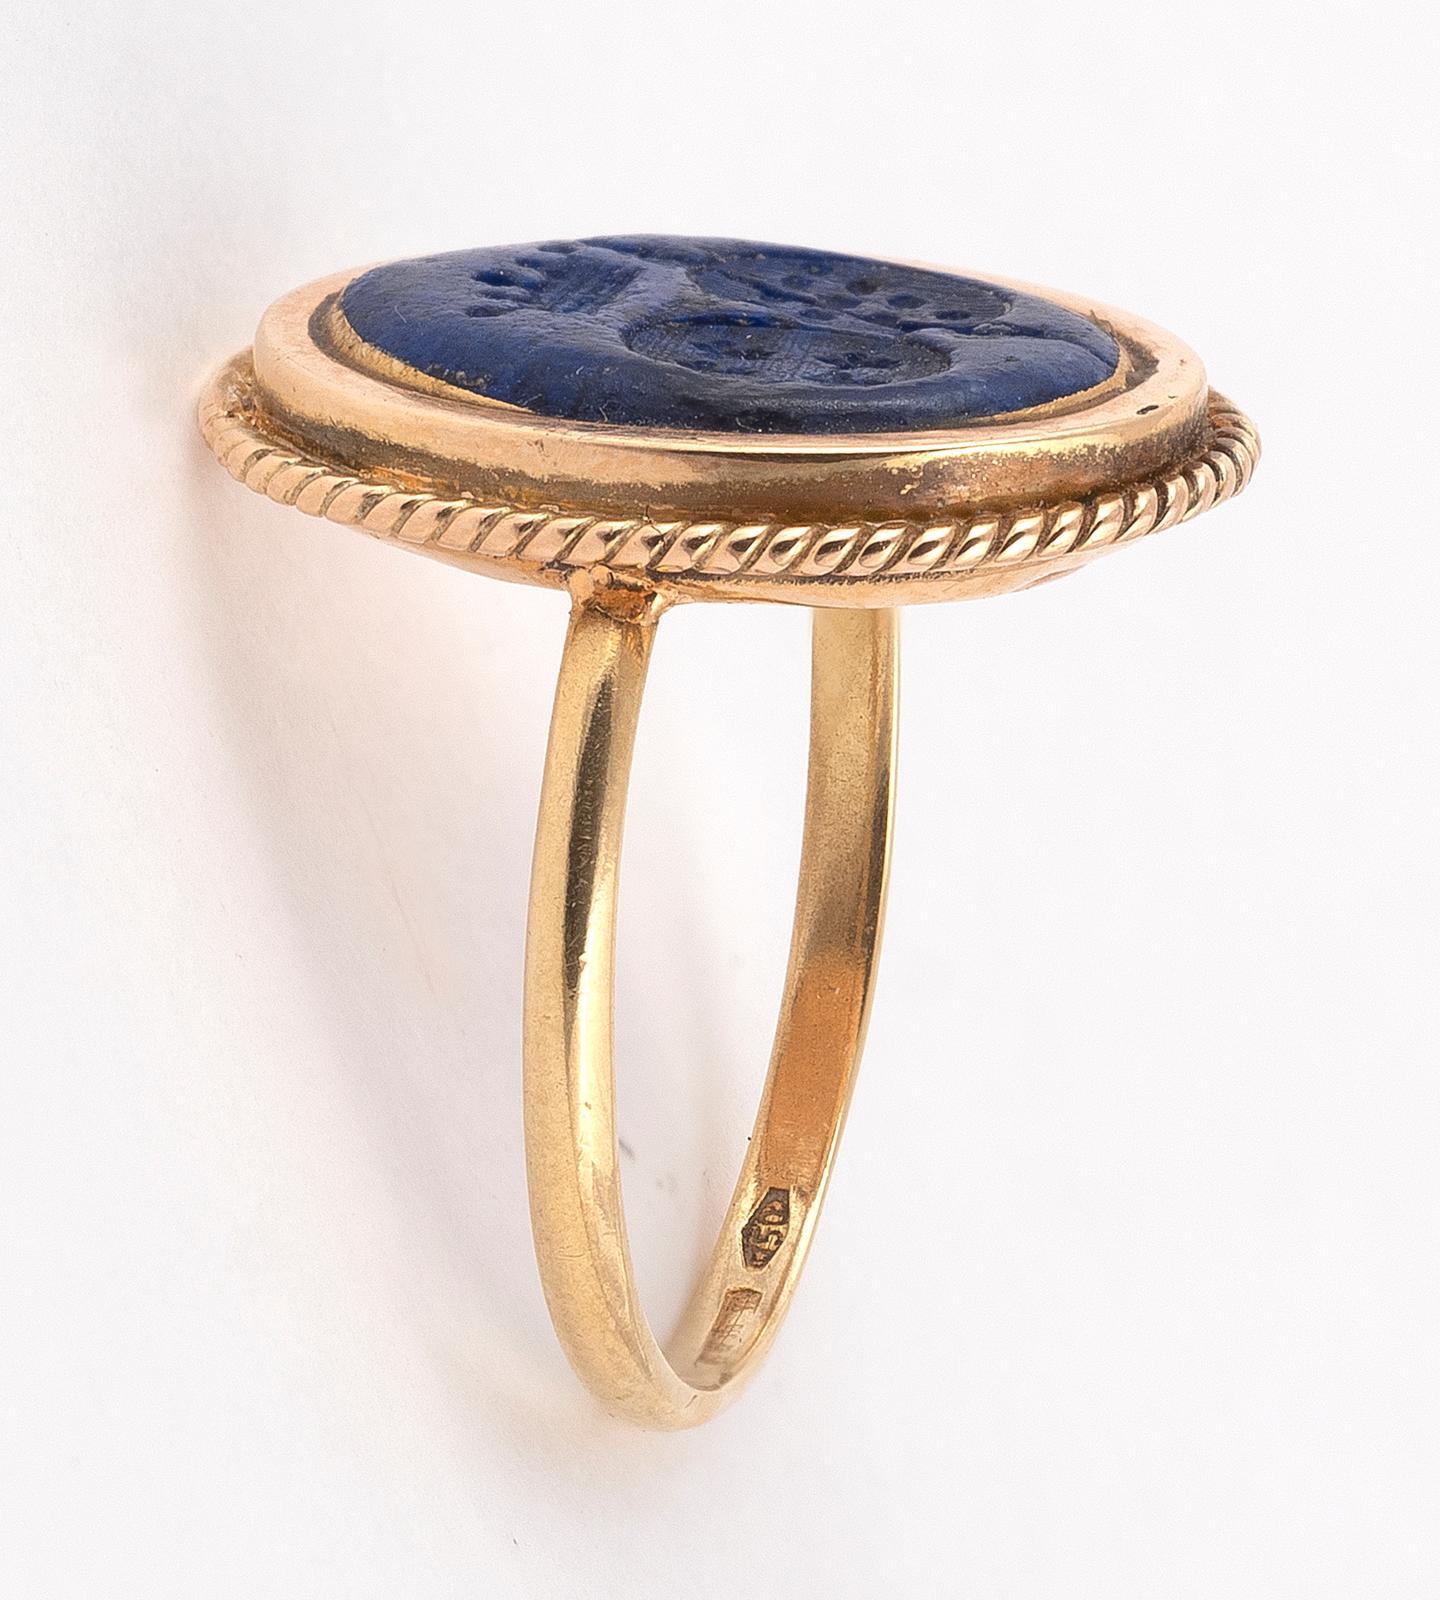 Wedding ring made up of a double coat of arms on lapis lazuli surmounted by a crown. Ring size: 6 
Weight: 3.7g. 